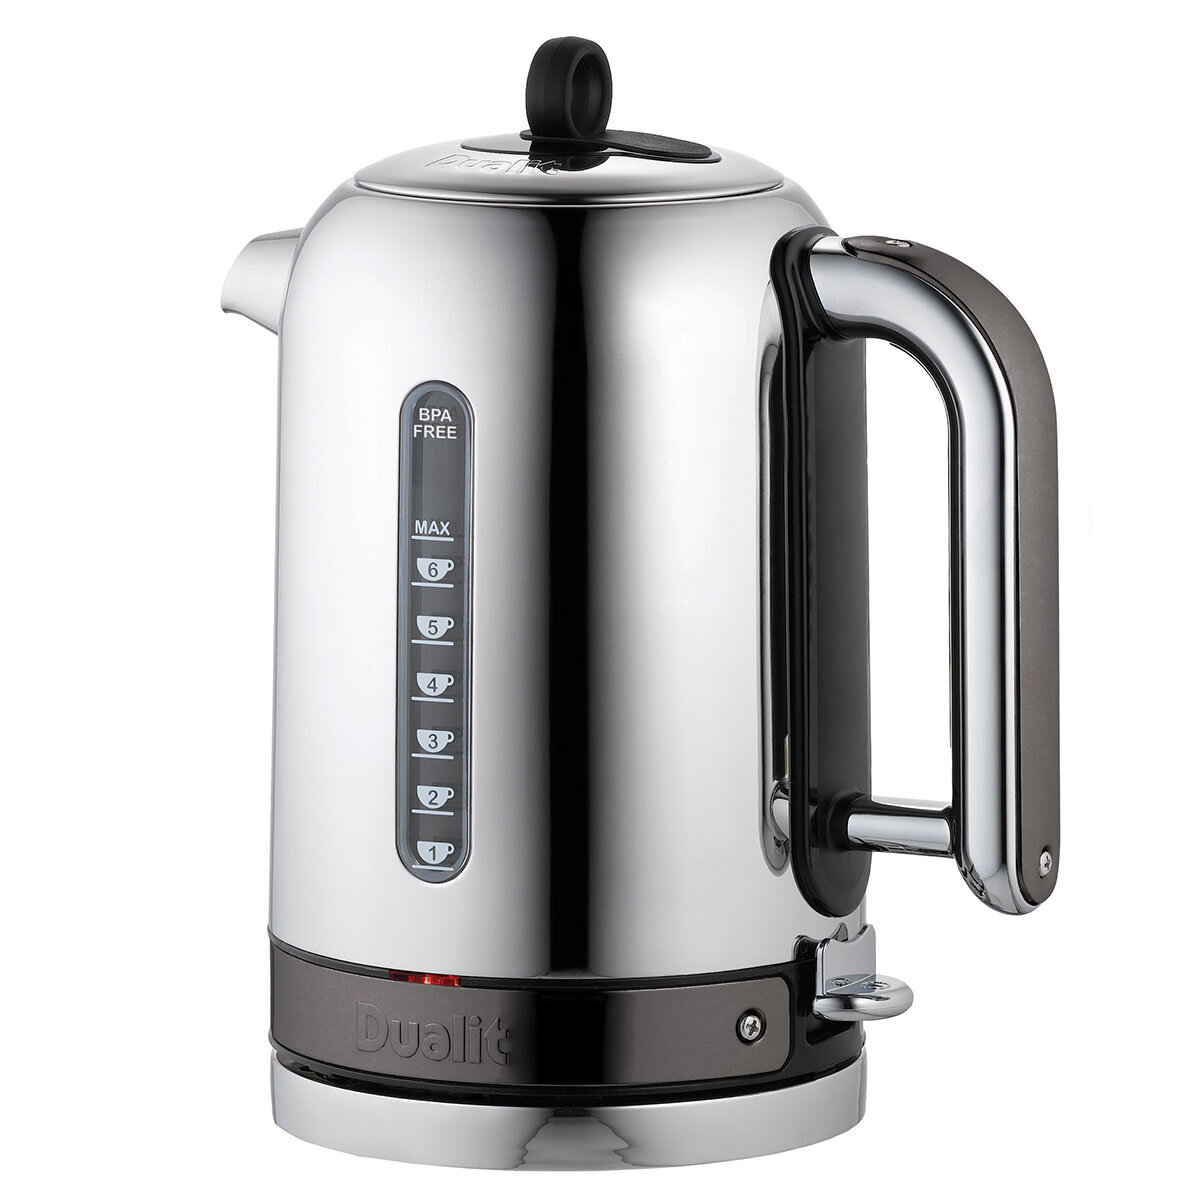 Dualit classic kettle review 